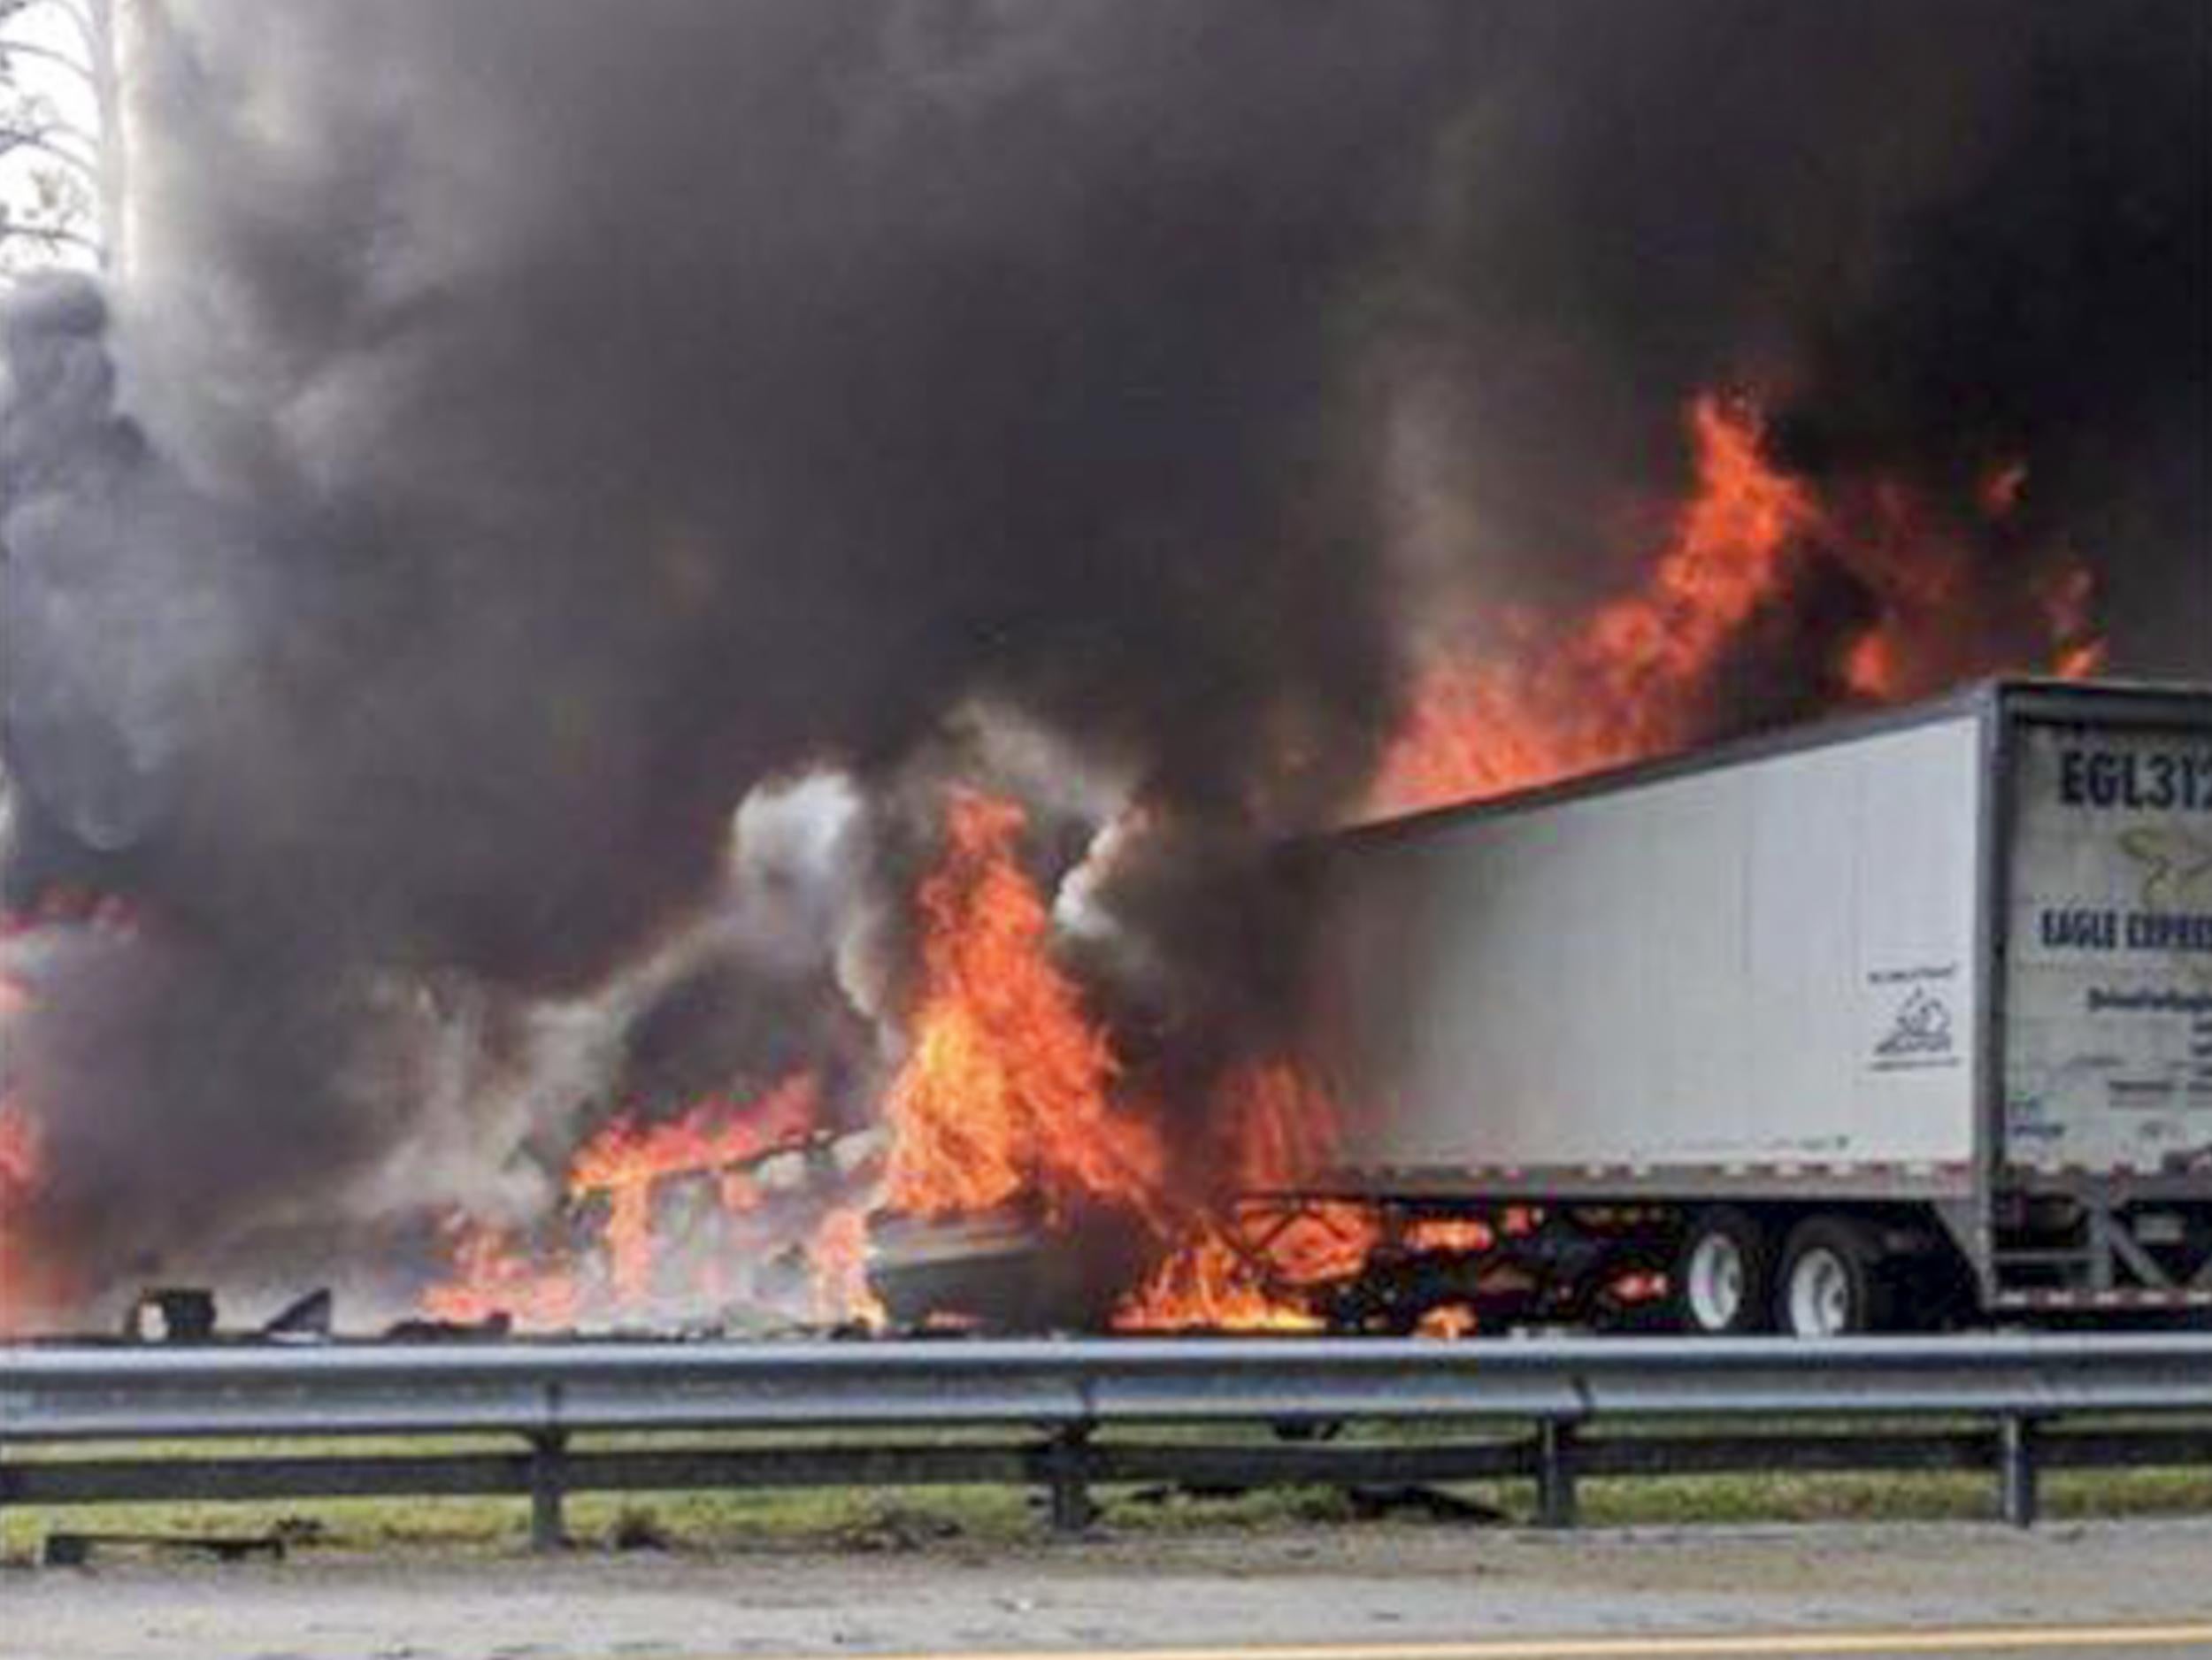 Five children from a Louisiana church group headed for a Disney World were among the seven killed in a fiery highway crash.